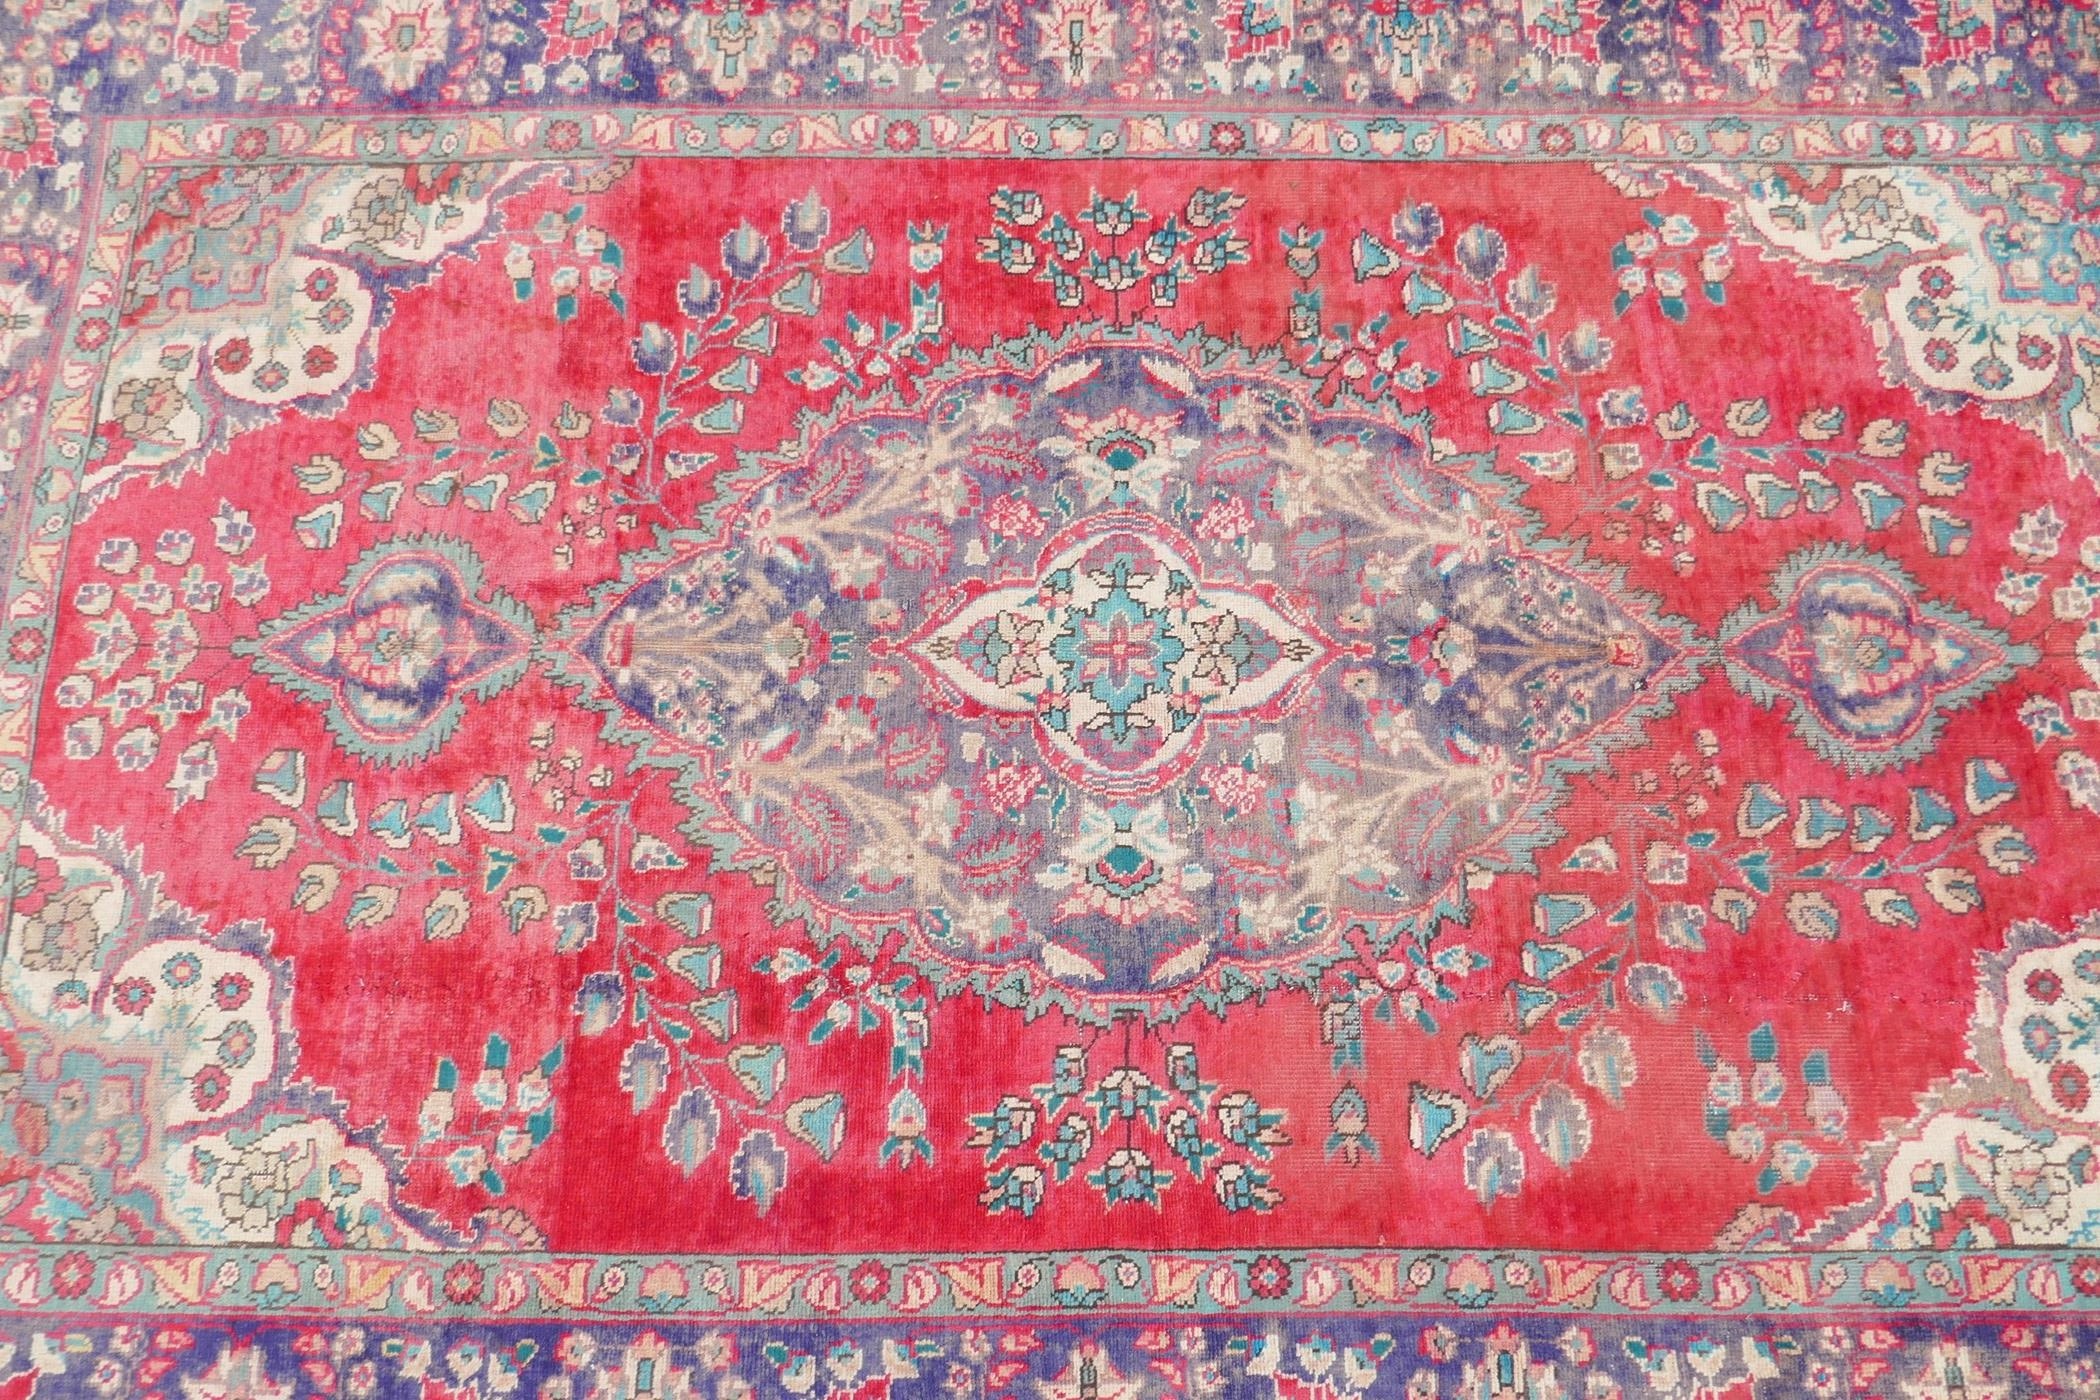 A vintage Iranian carpet from the Tabriz region, with a floral medallion design on a red field